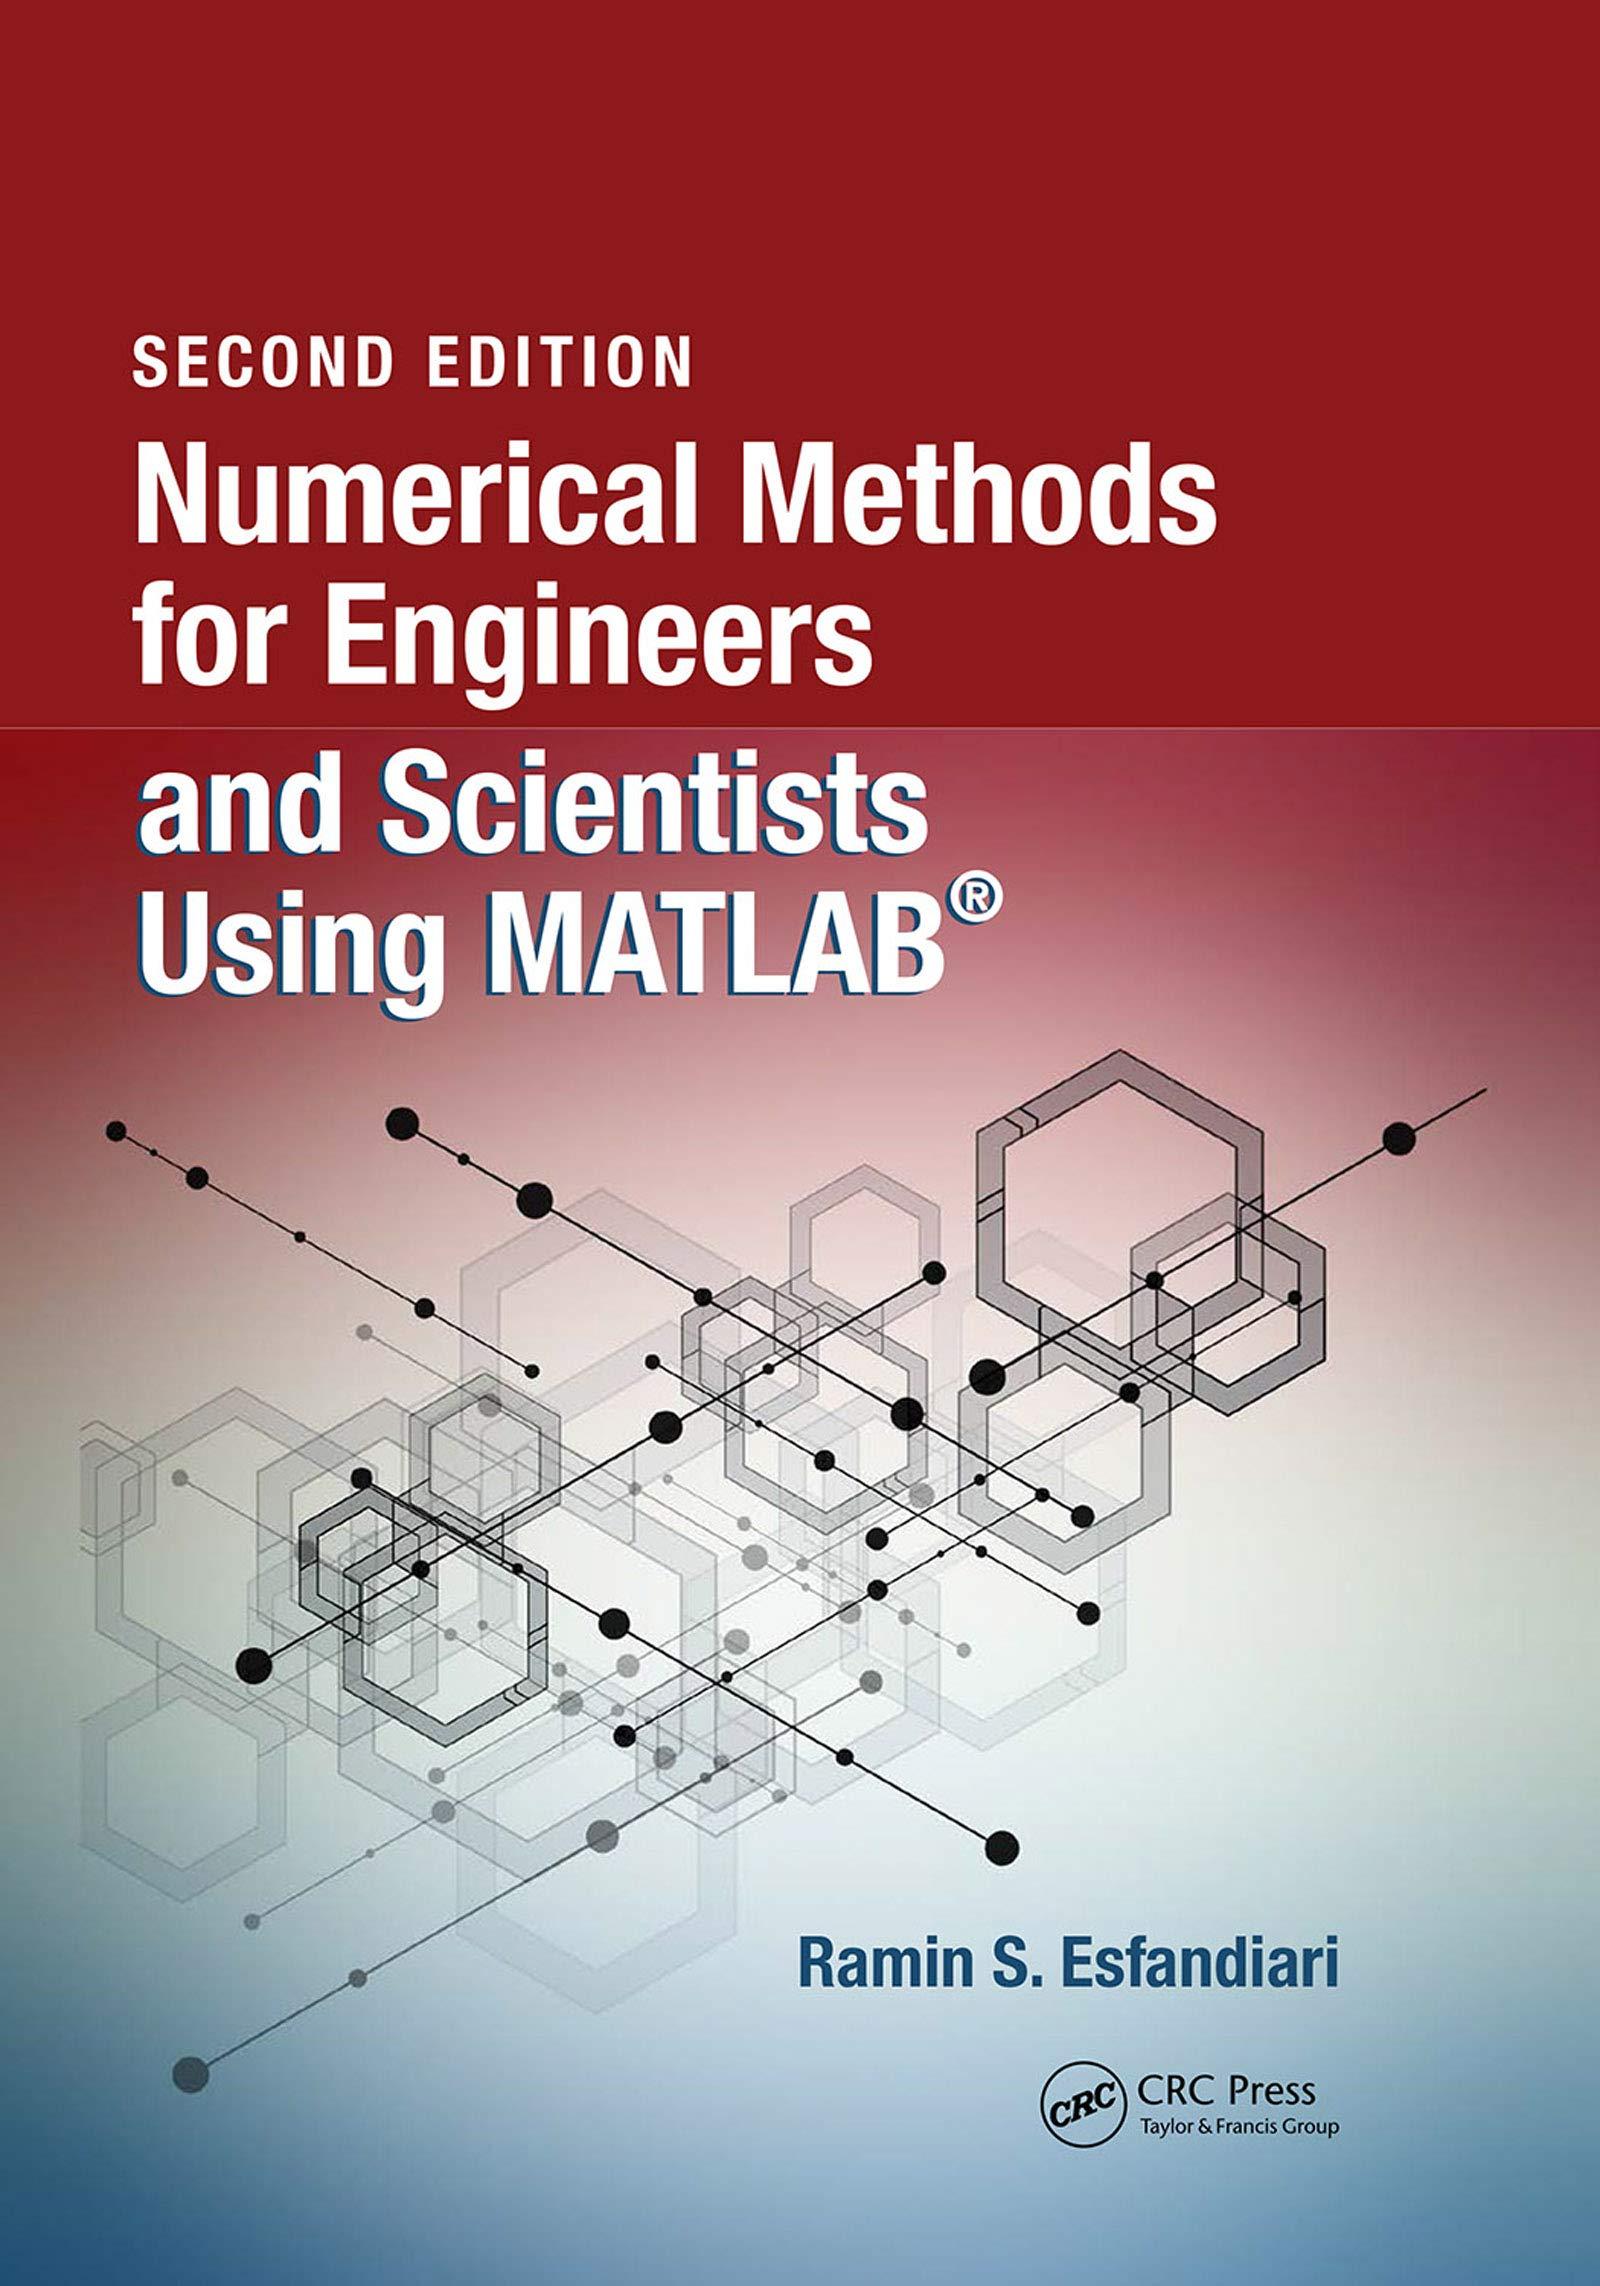 numerical methods for engineers and scientists using matlab 2nd edition ramin s. esfandiari 1498777422,